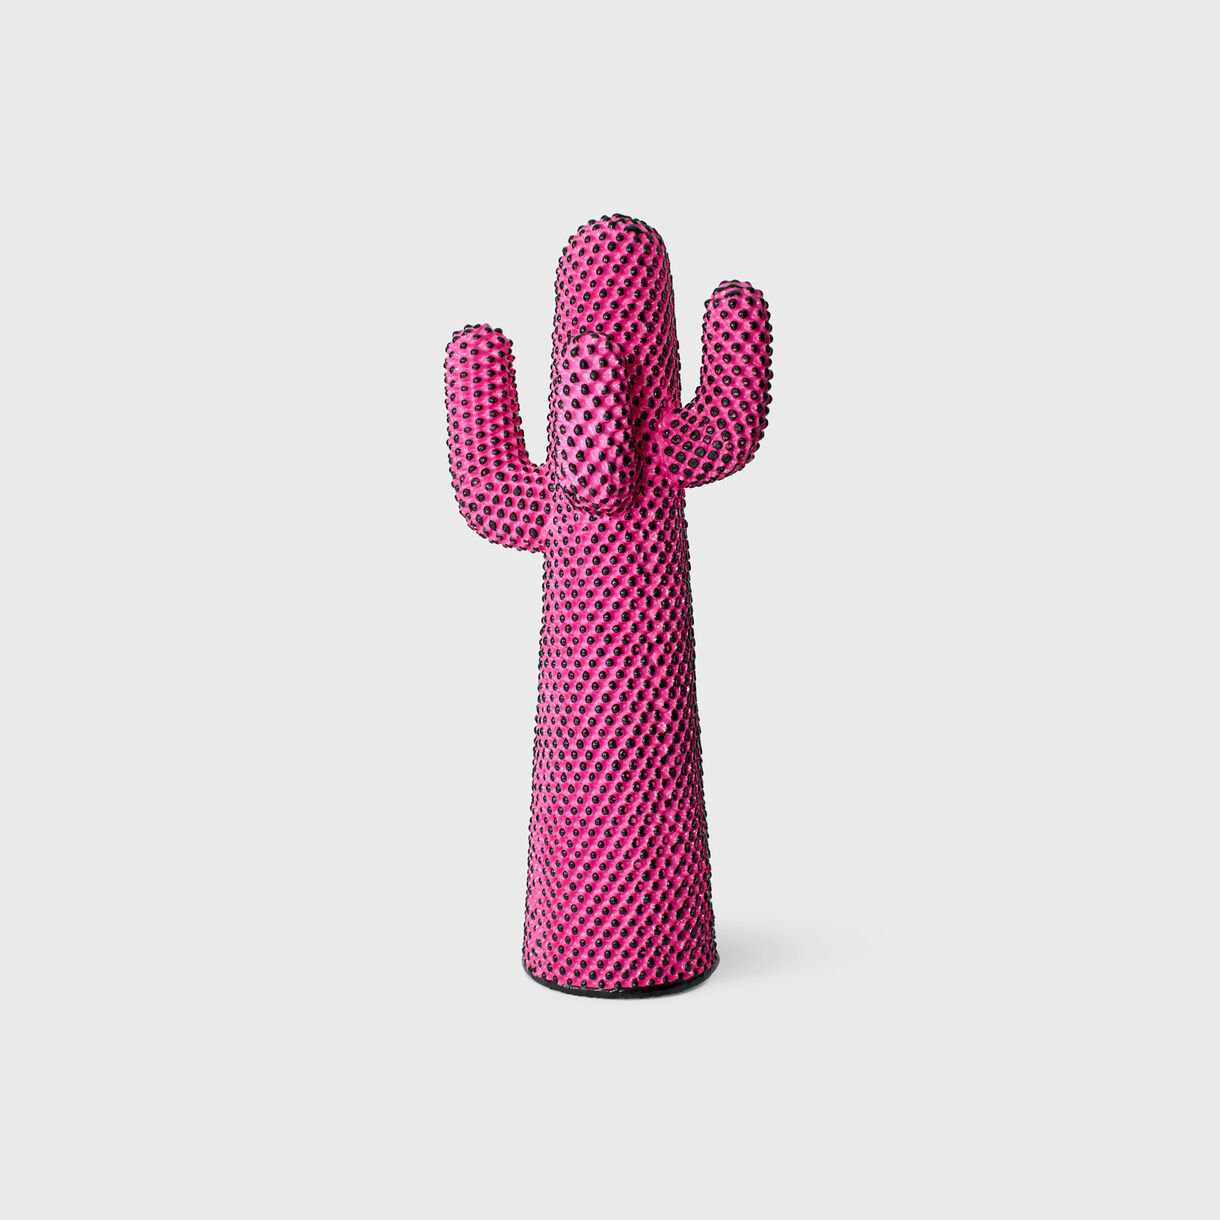 Andy's Cactus, Pink